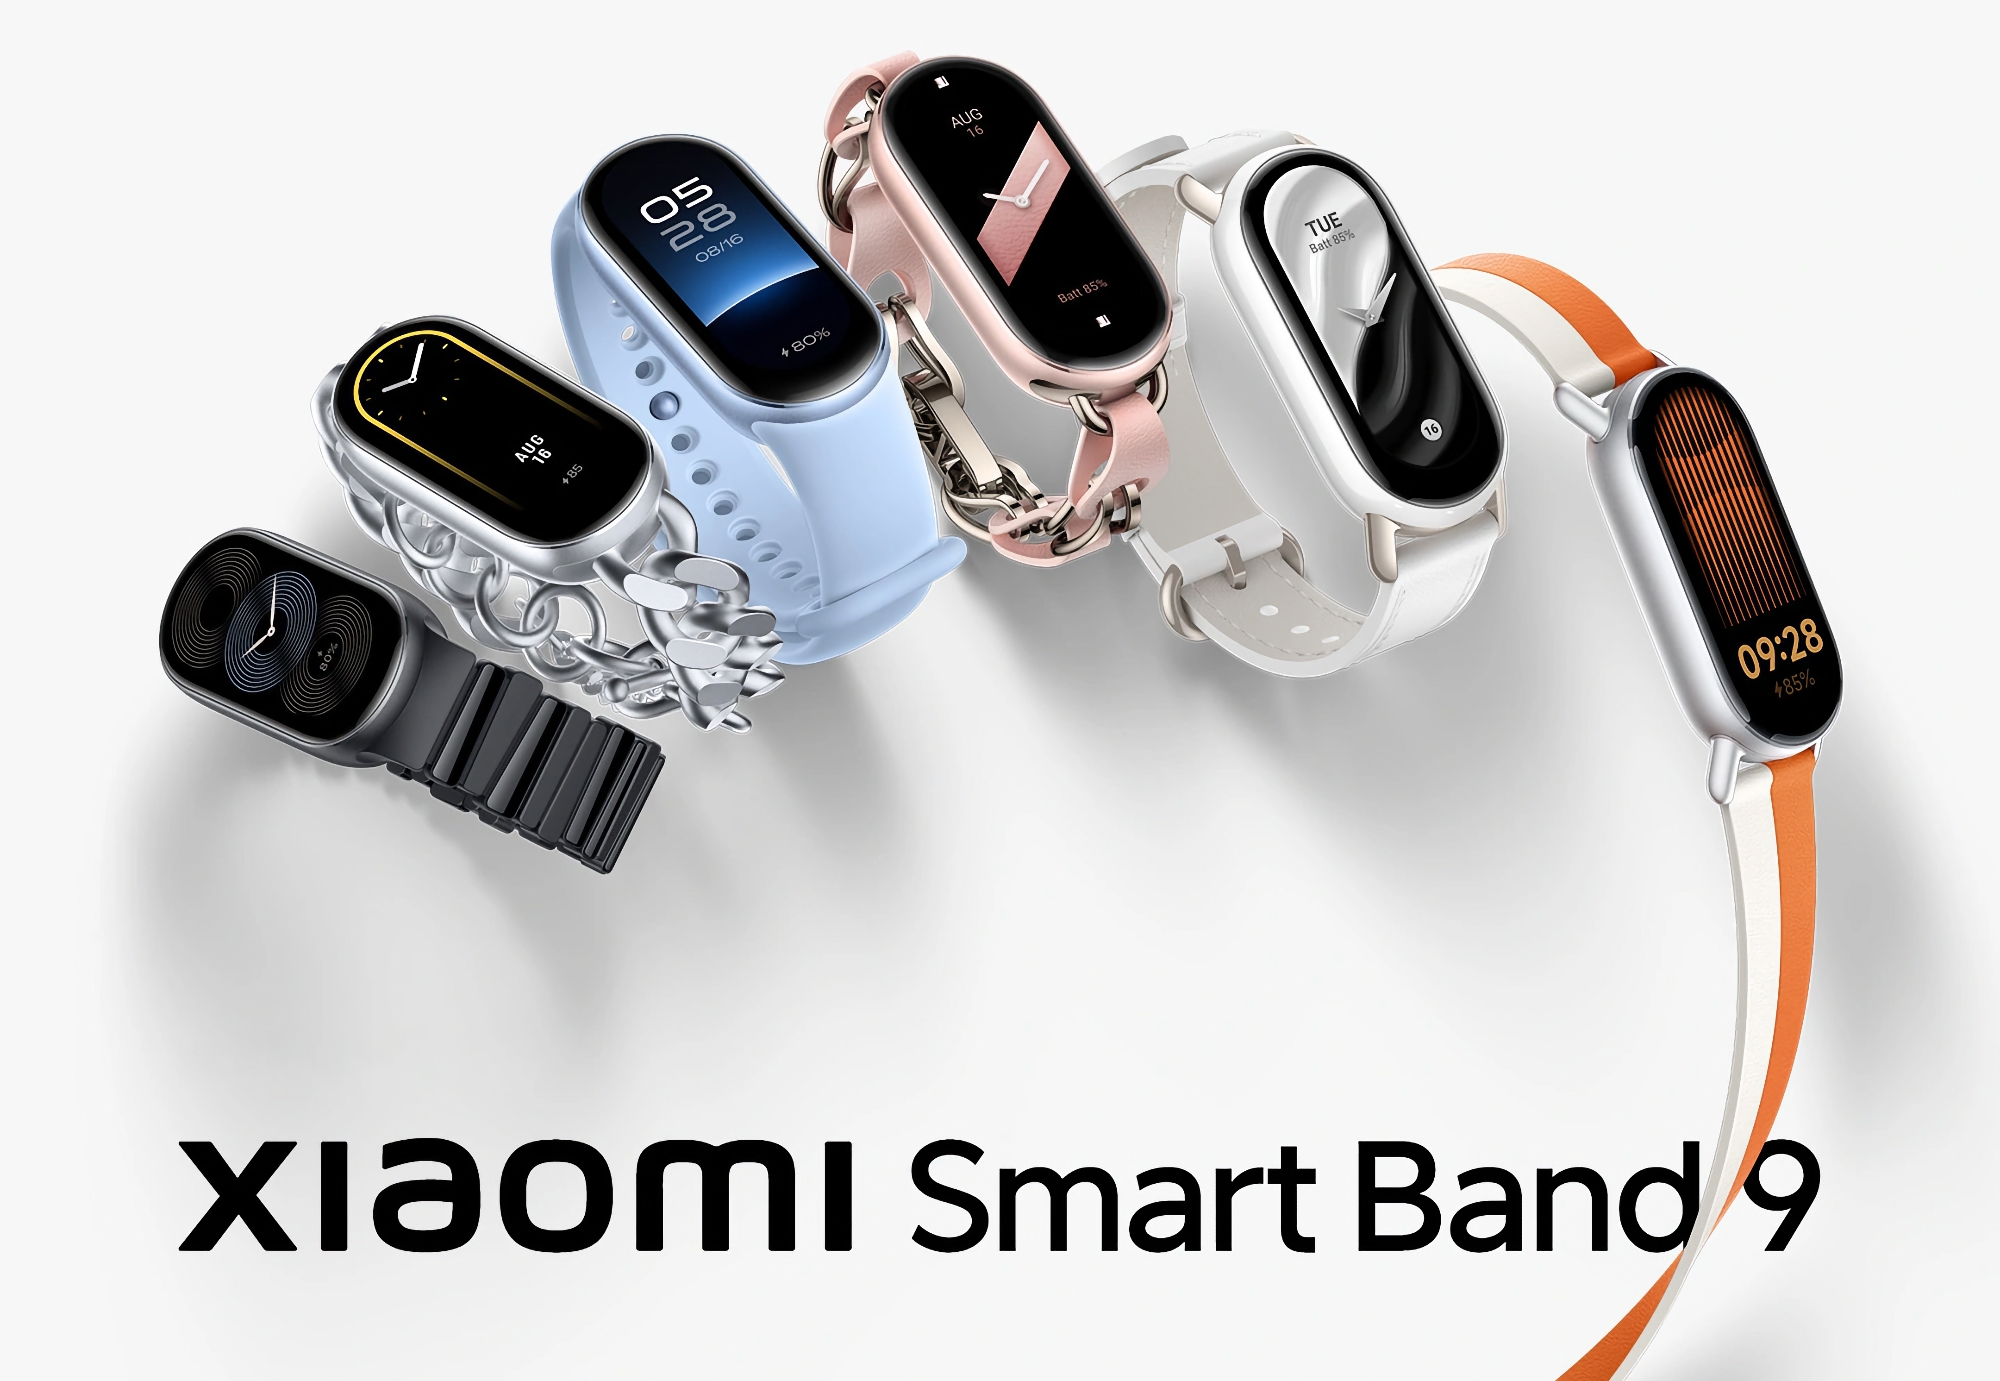 Improved sensors and up to 21 days of battery life: Xiaomi has revealed some of the features of the Smart Band 9